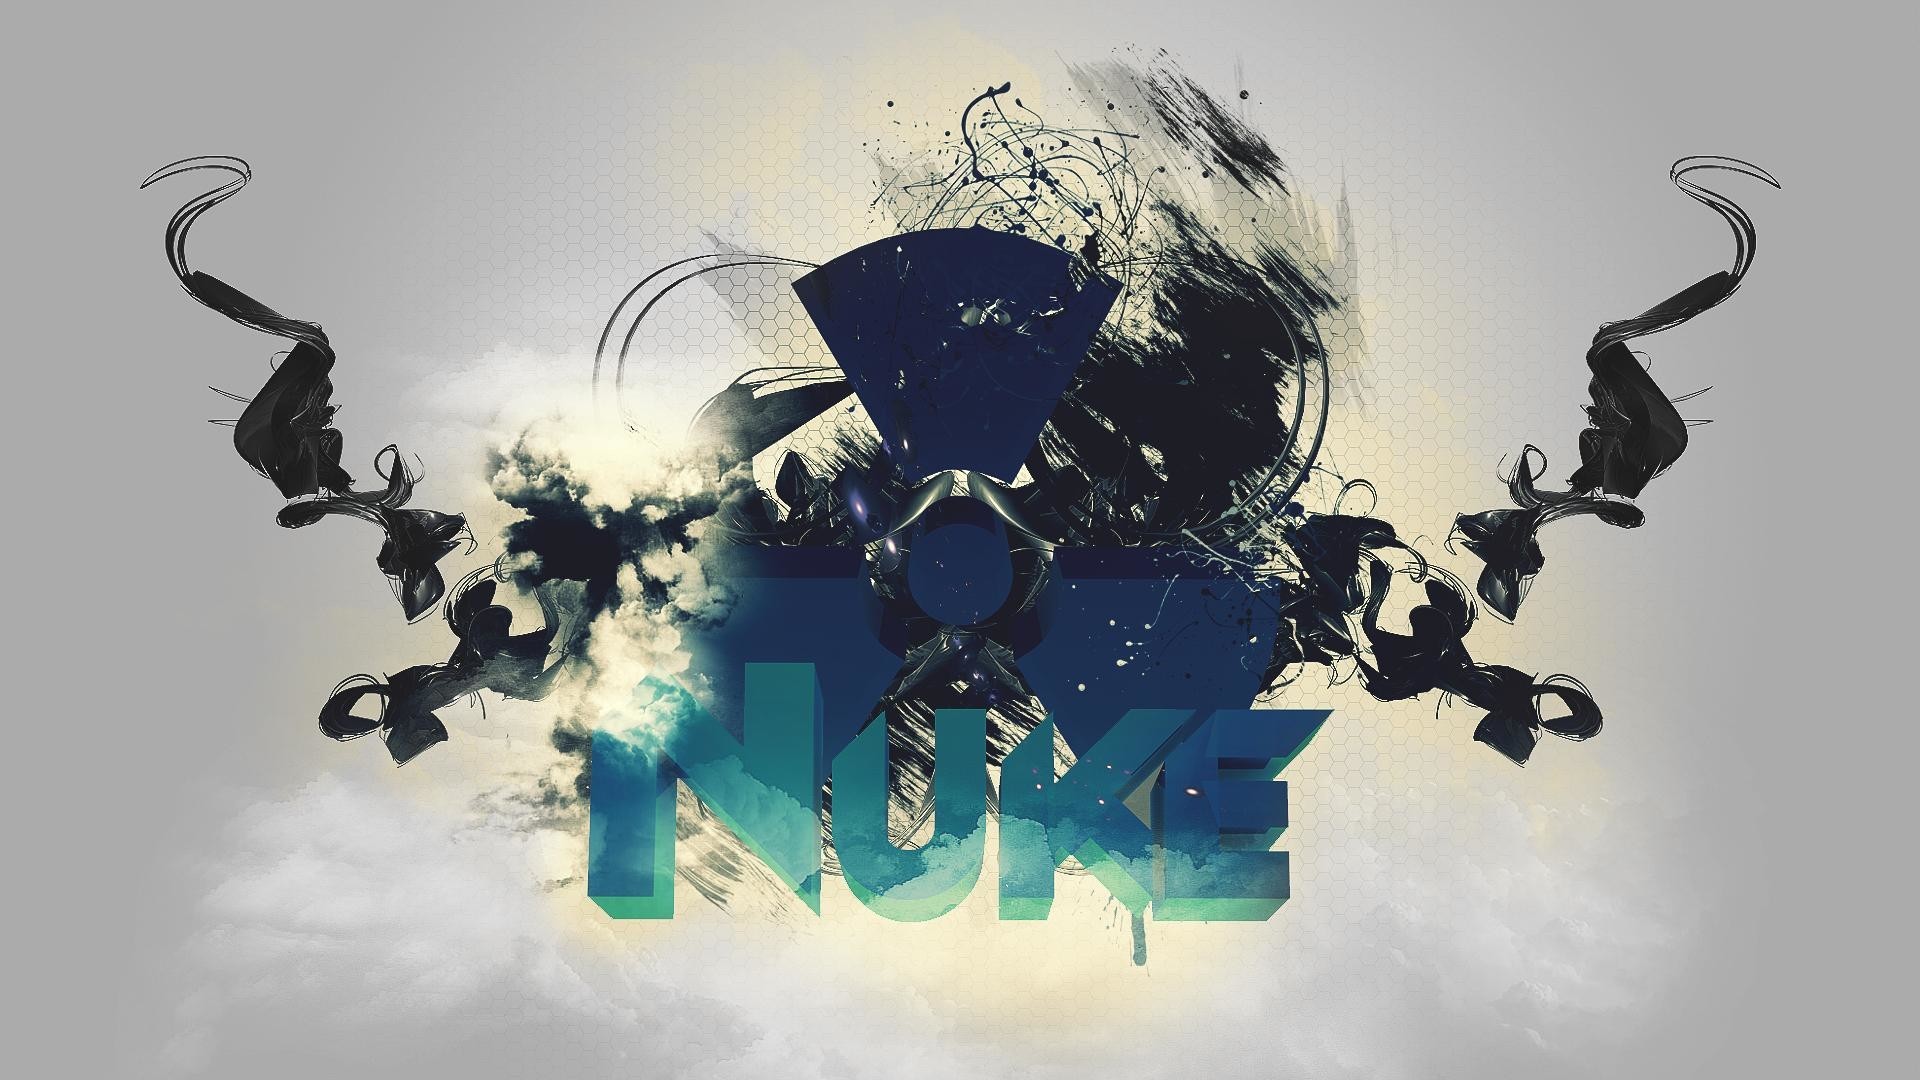 1920x1080  Nice Images Collection: Nuke Desktop Wallpapers